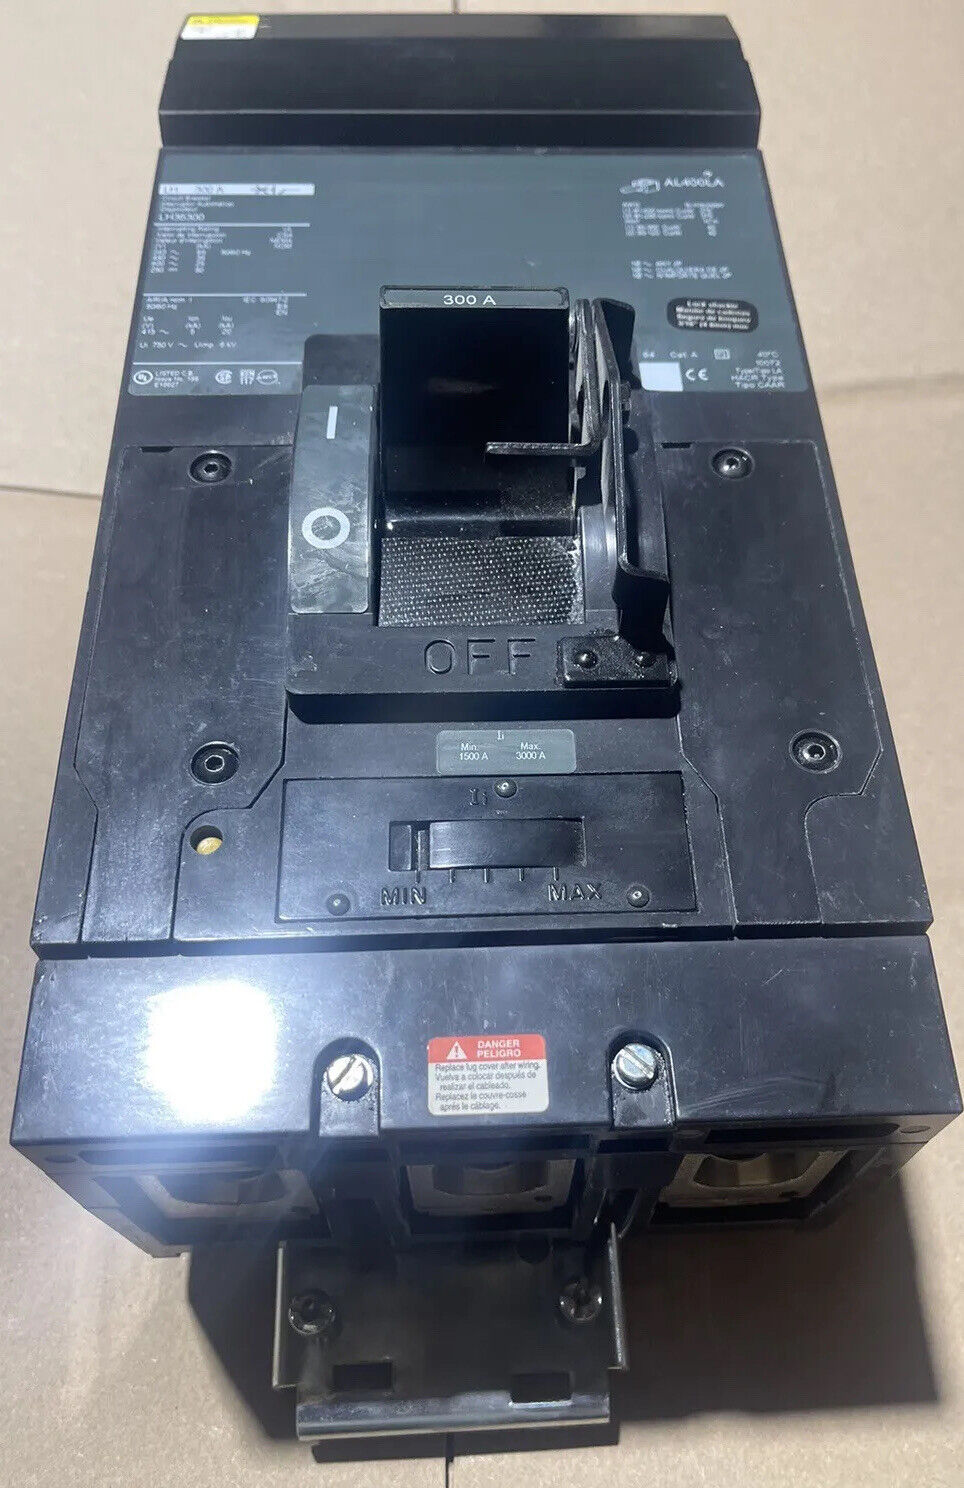 Square D LH36300 600V 300A 3PH I-Line Circuit Breaker New Pull Out